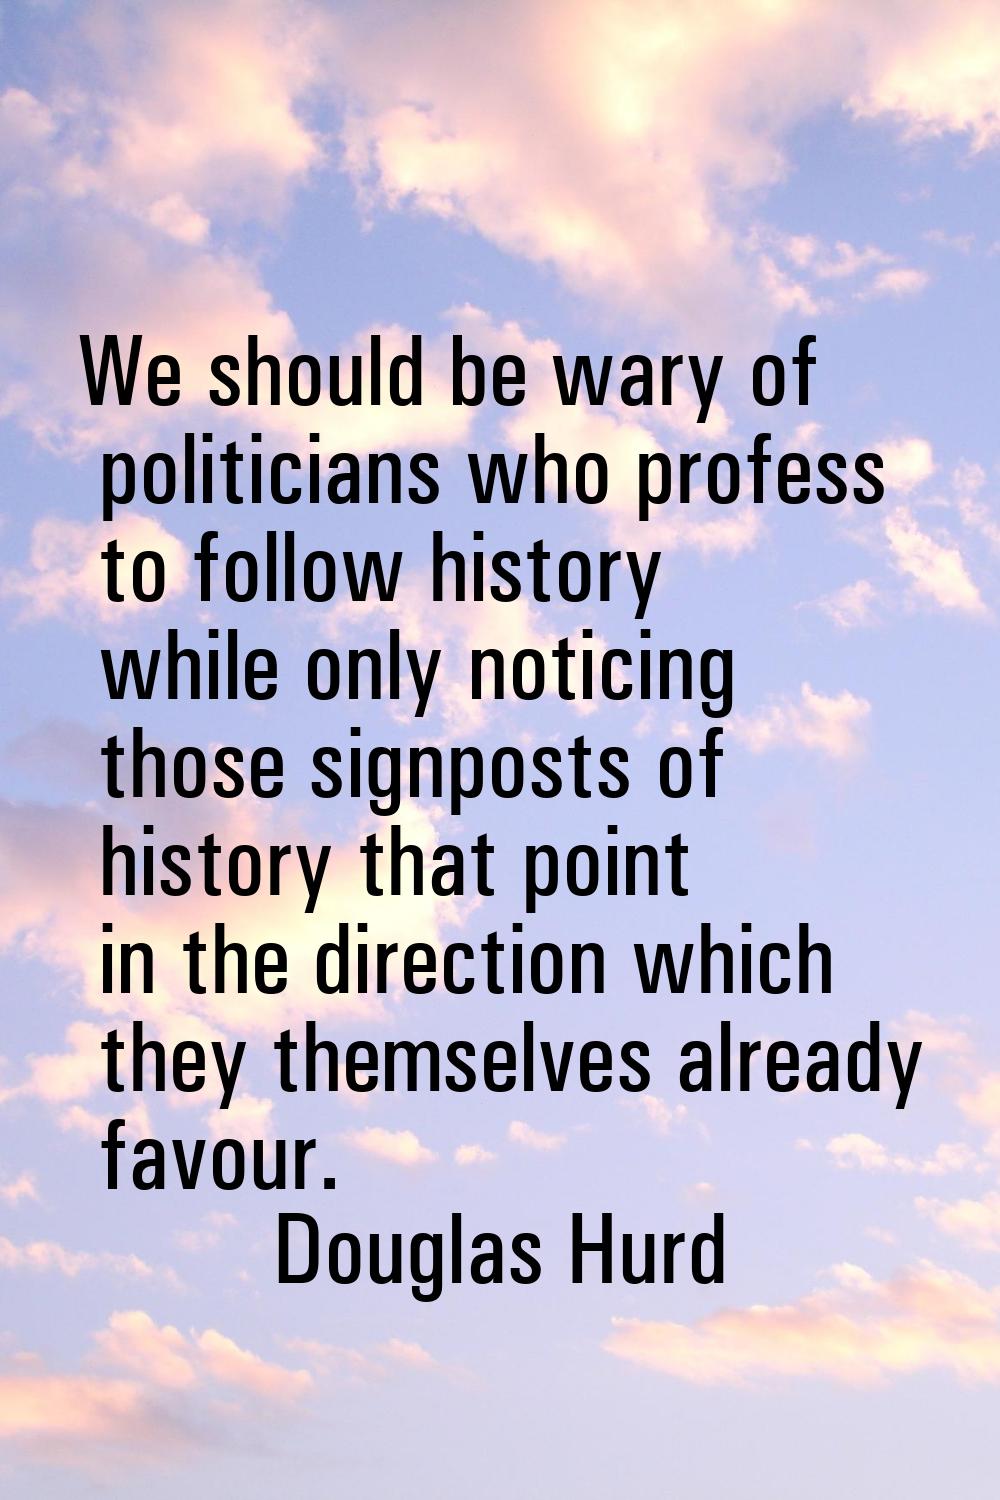 We should be wary of politicians who profess to follow history while only noticing those signposts 